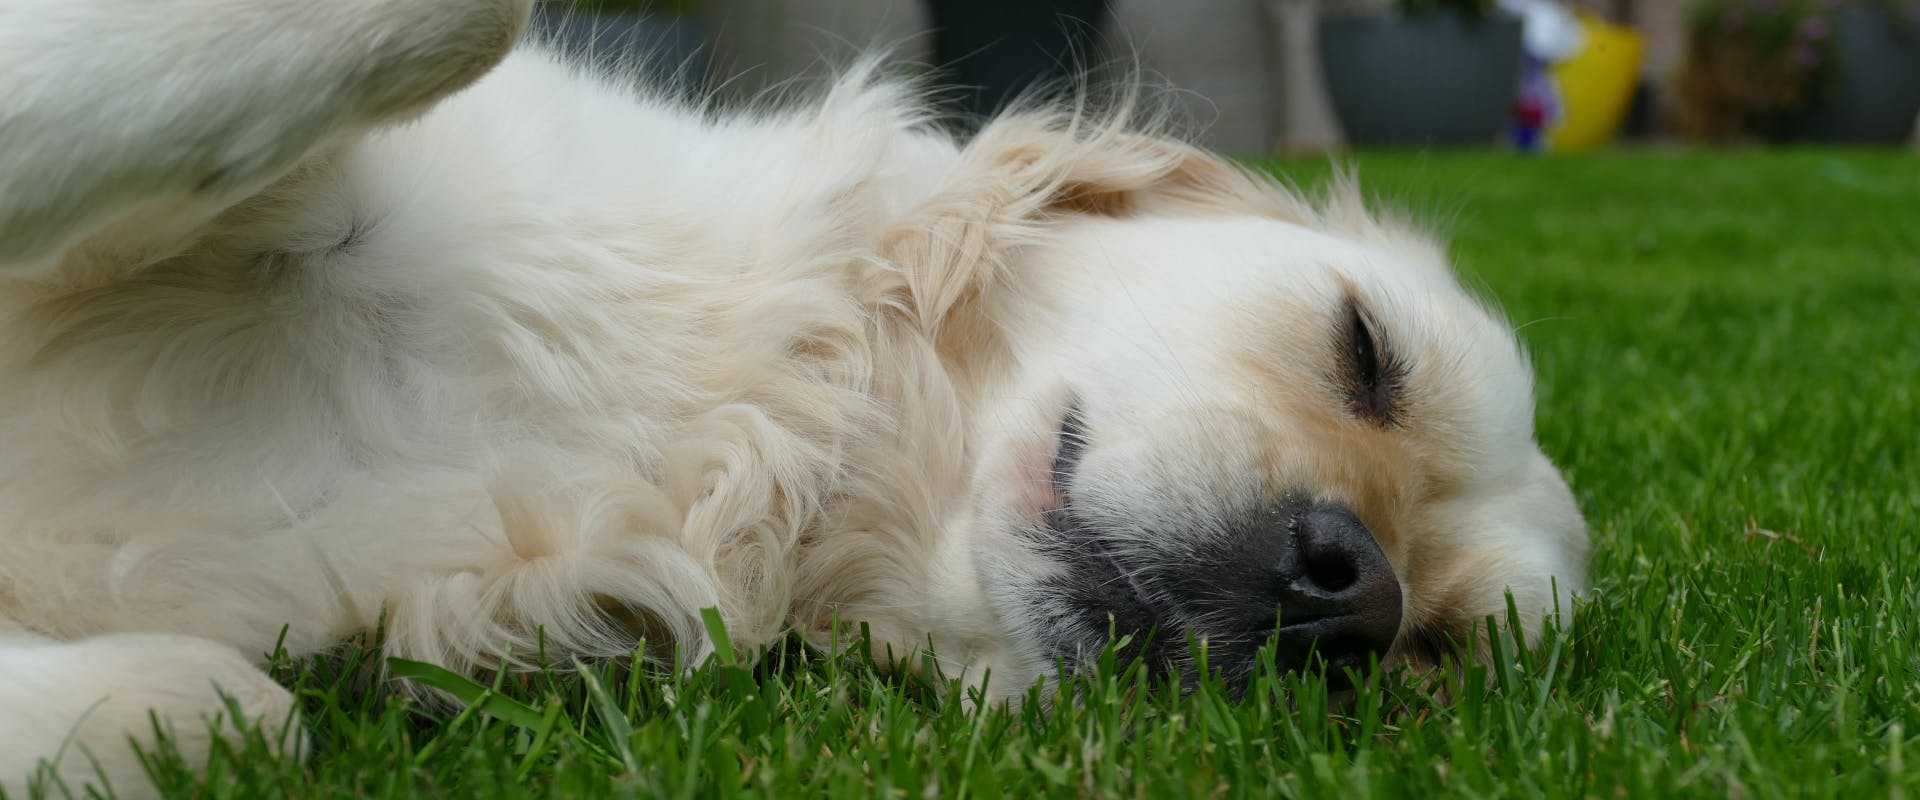 a golden retriever sleeping on its side on a grassy lawn